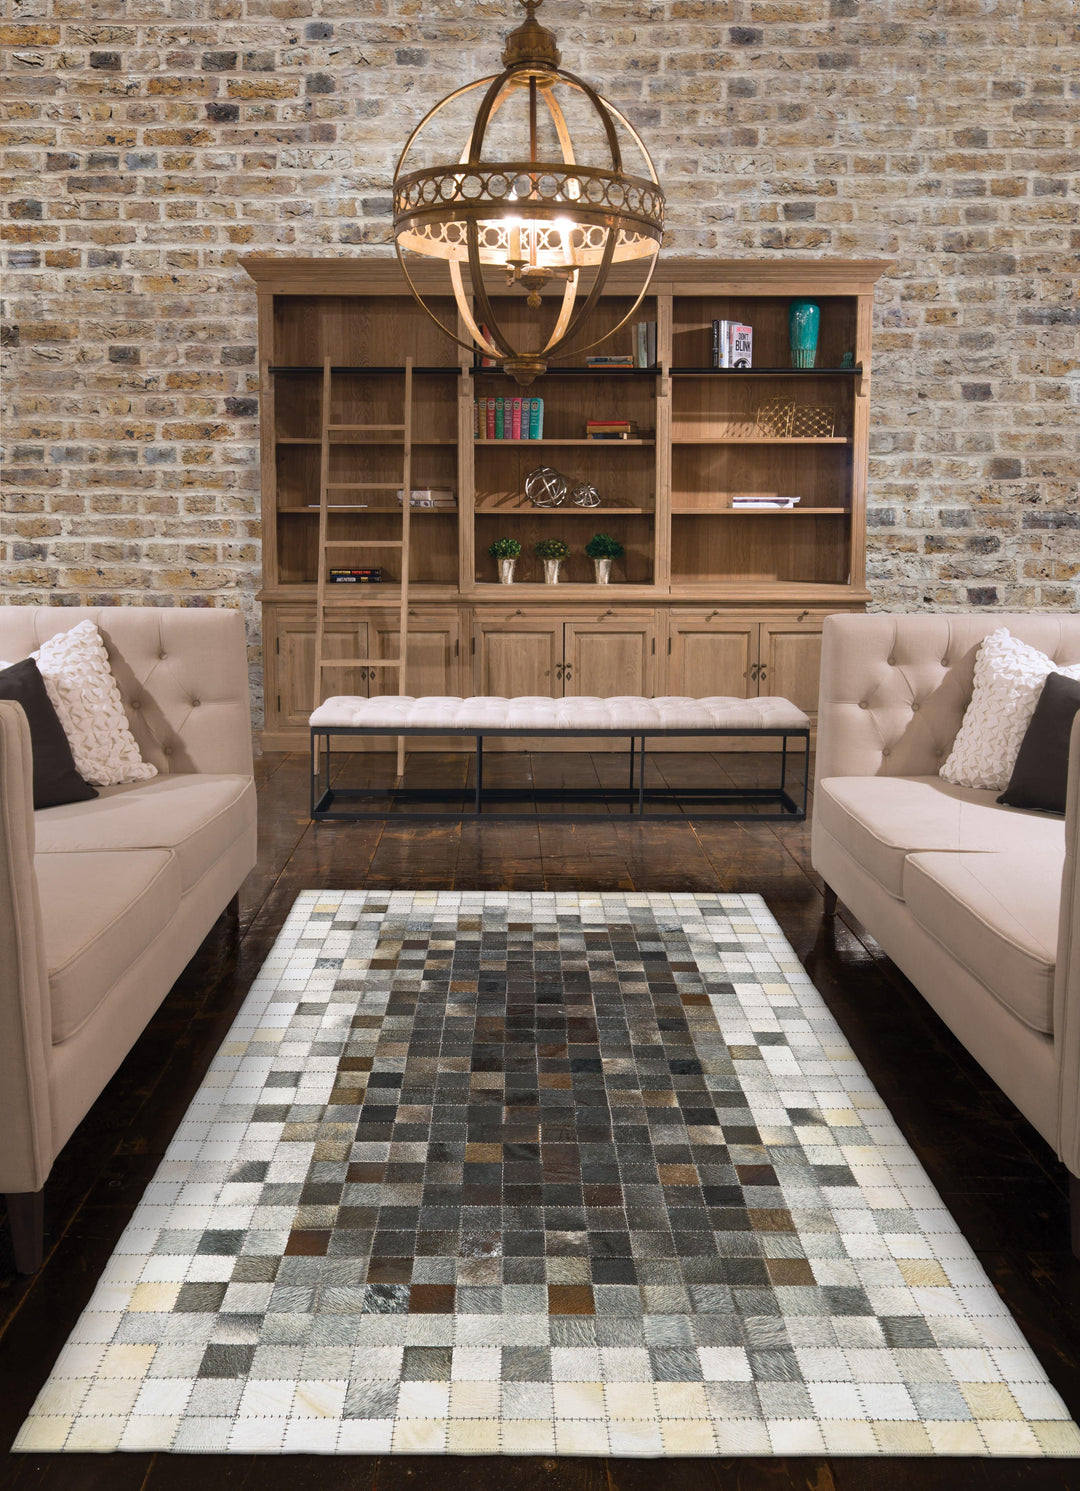 Feizy Feizy Estelle Mosaic Leather Cowhide Rug - Gray & Dark Brown - Available in 3 Sizes